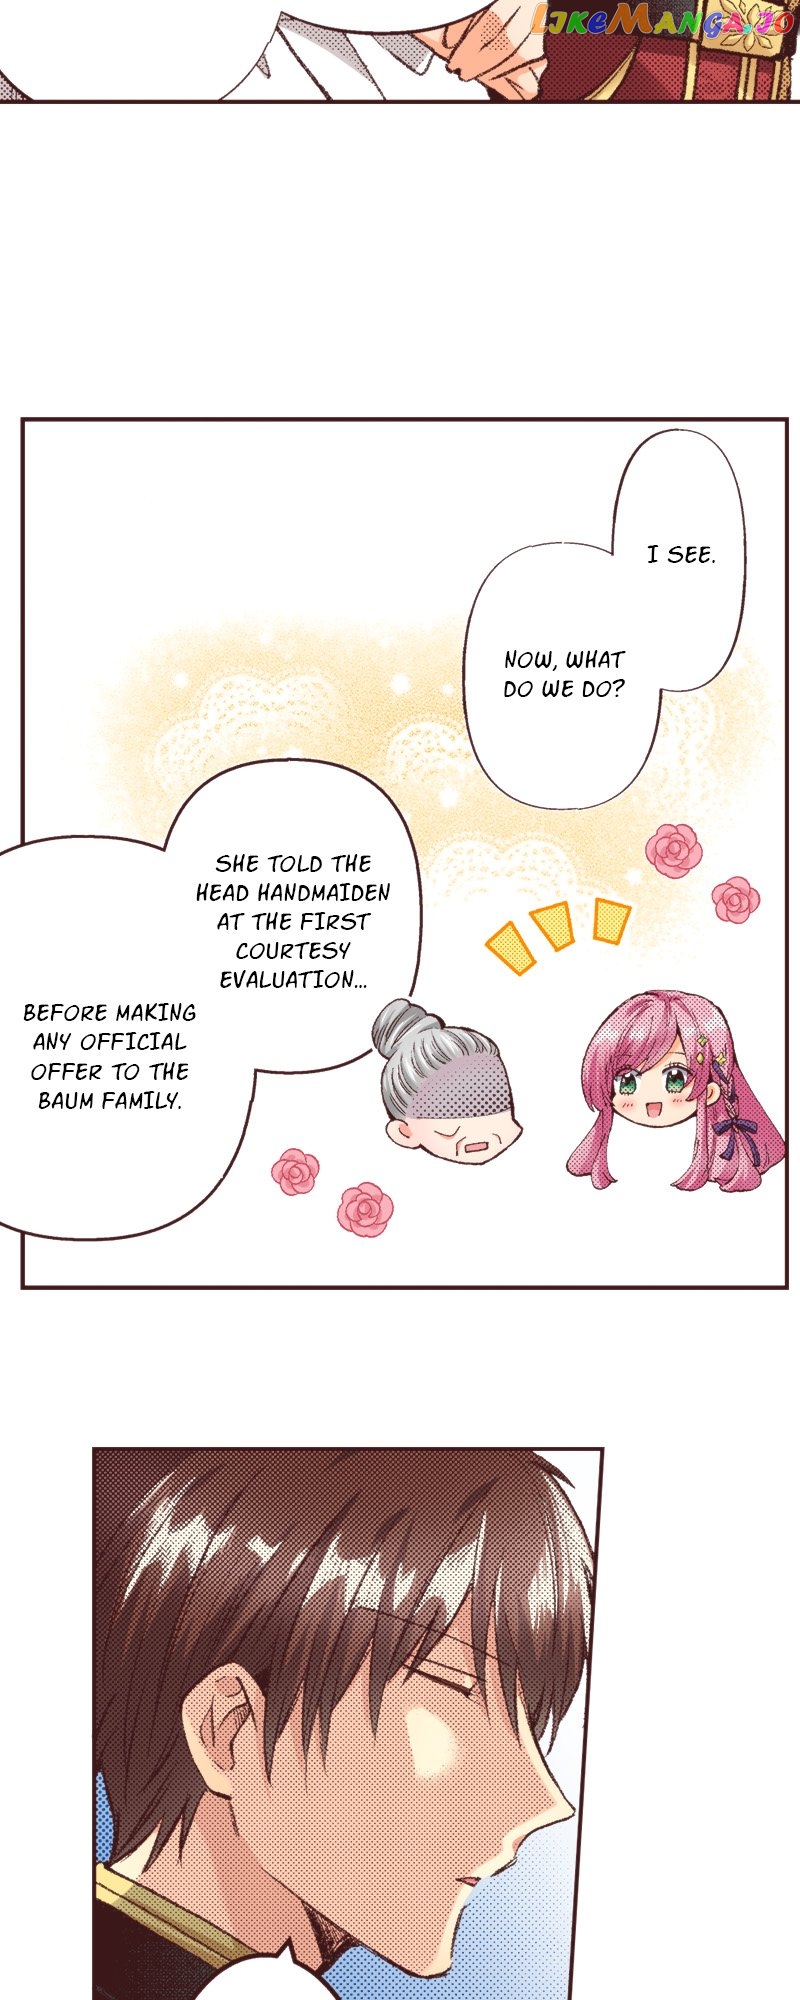 I’Ve Reincarnated Into A Handmaiden! - chapter 93 - #3